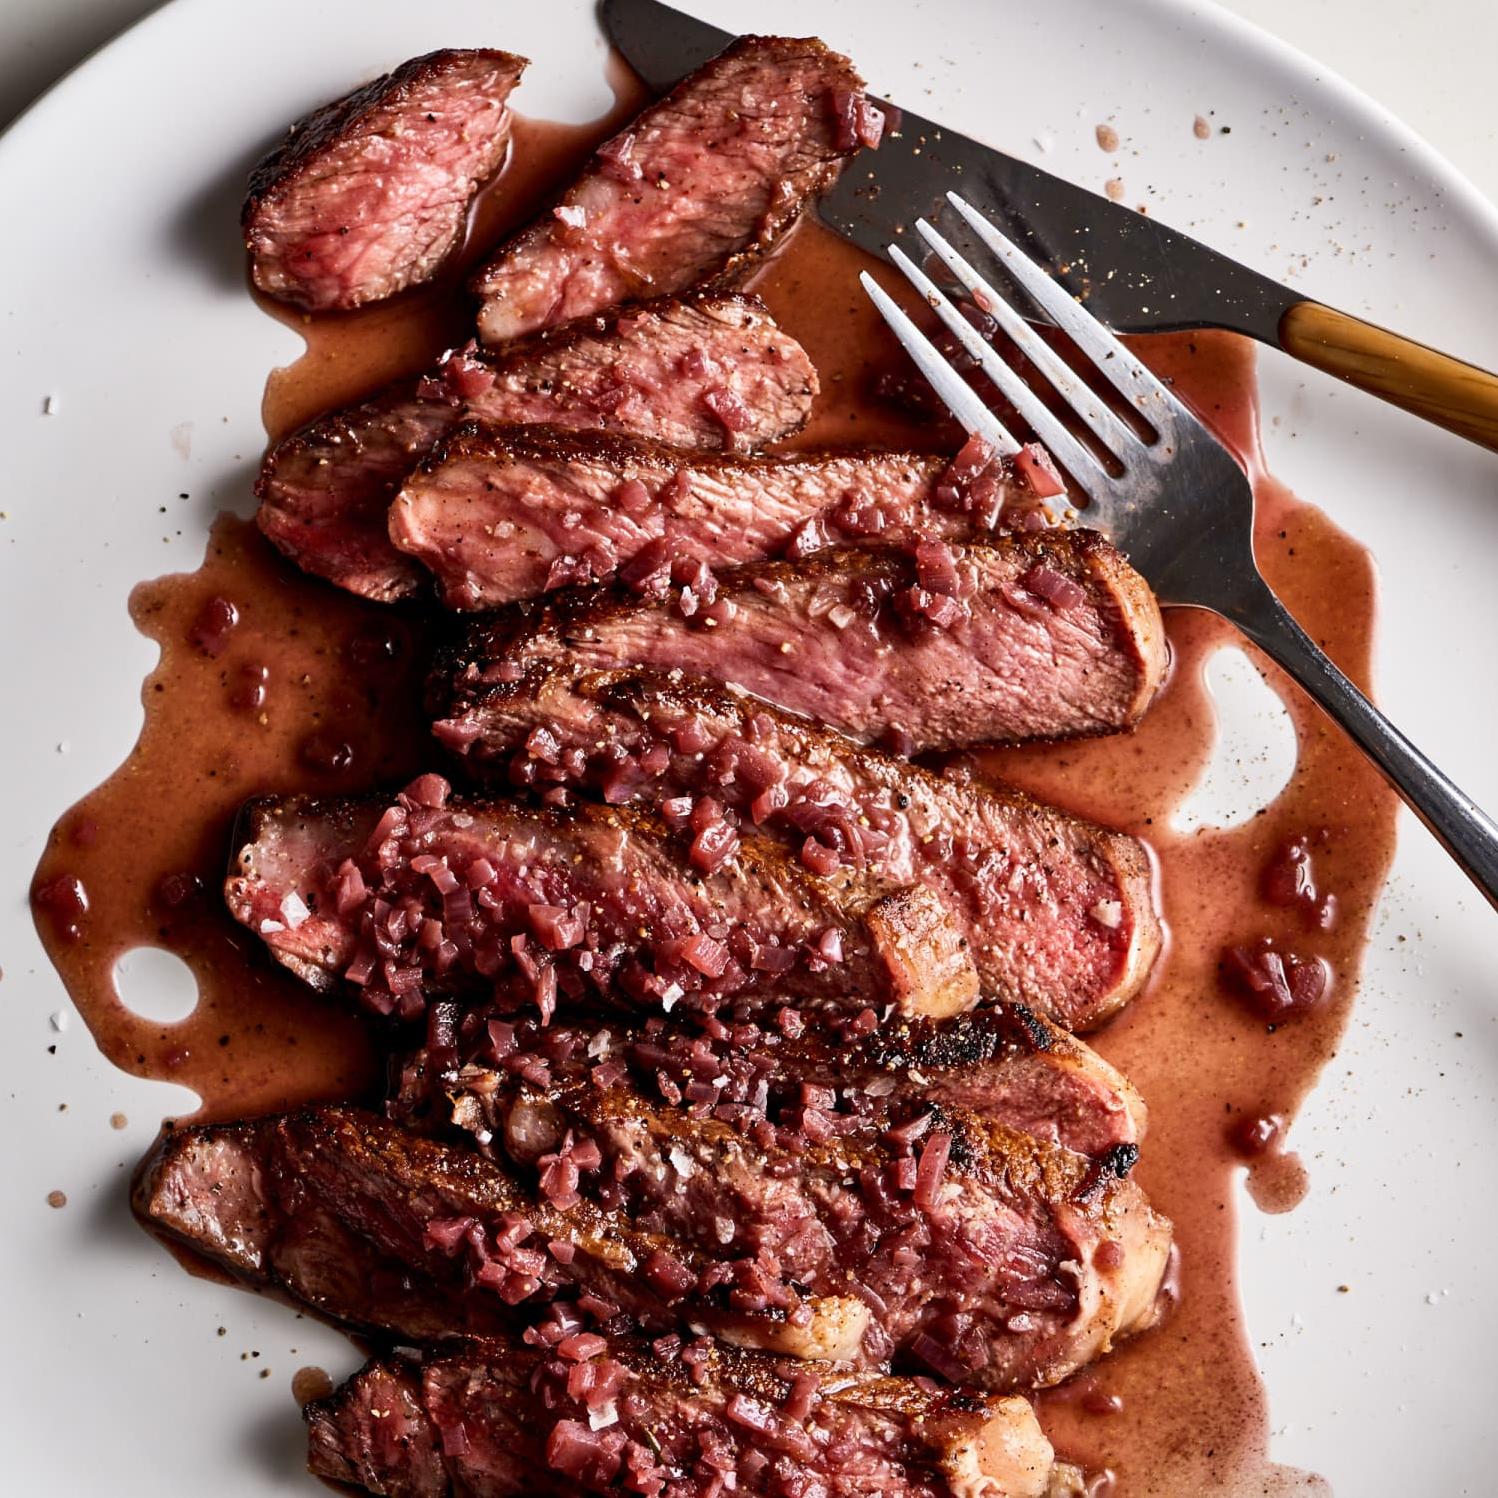  This steak is so tender, it practically melts in your mouth.